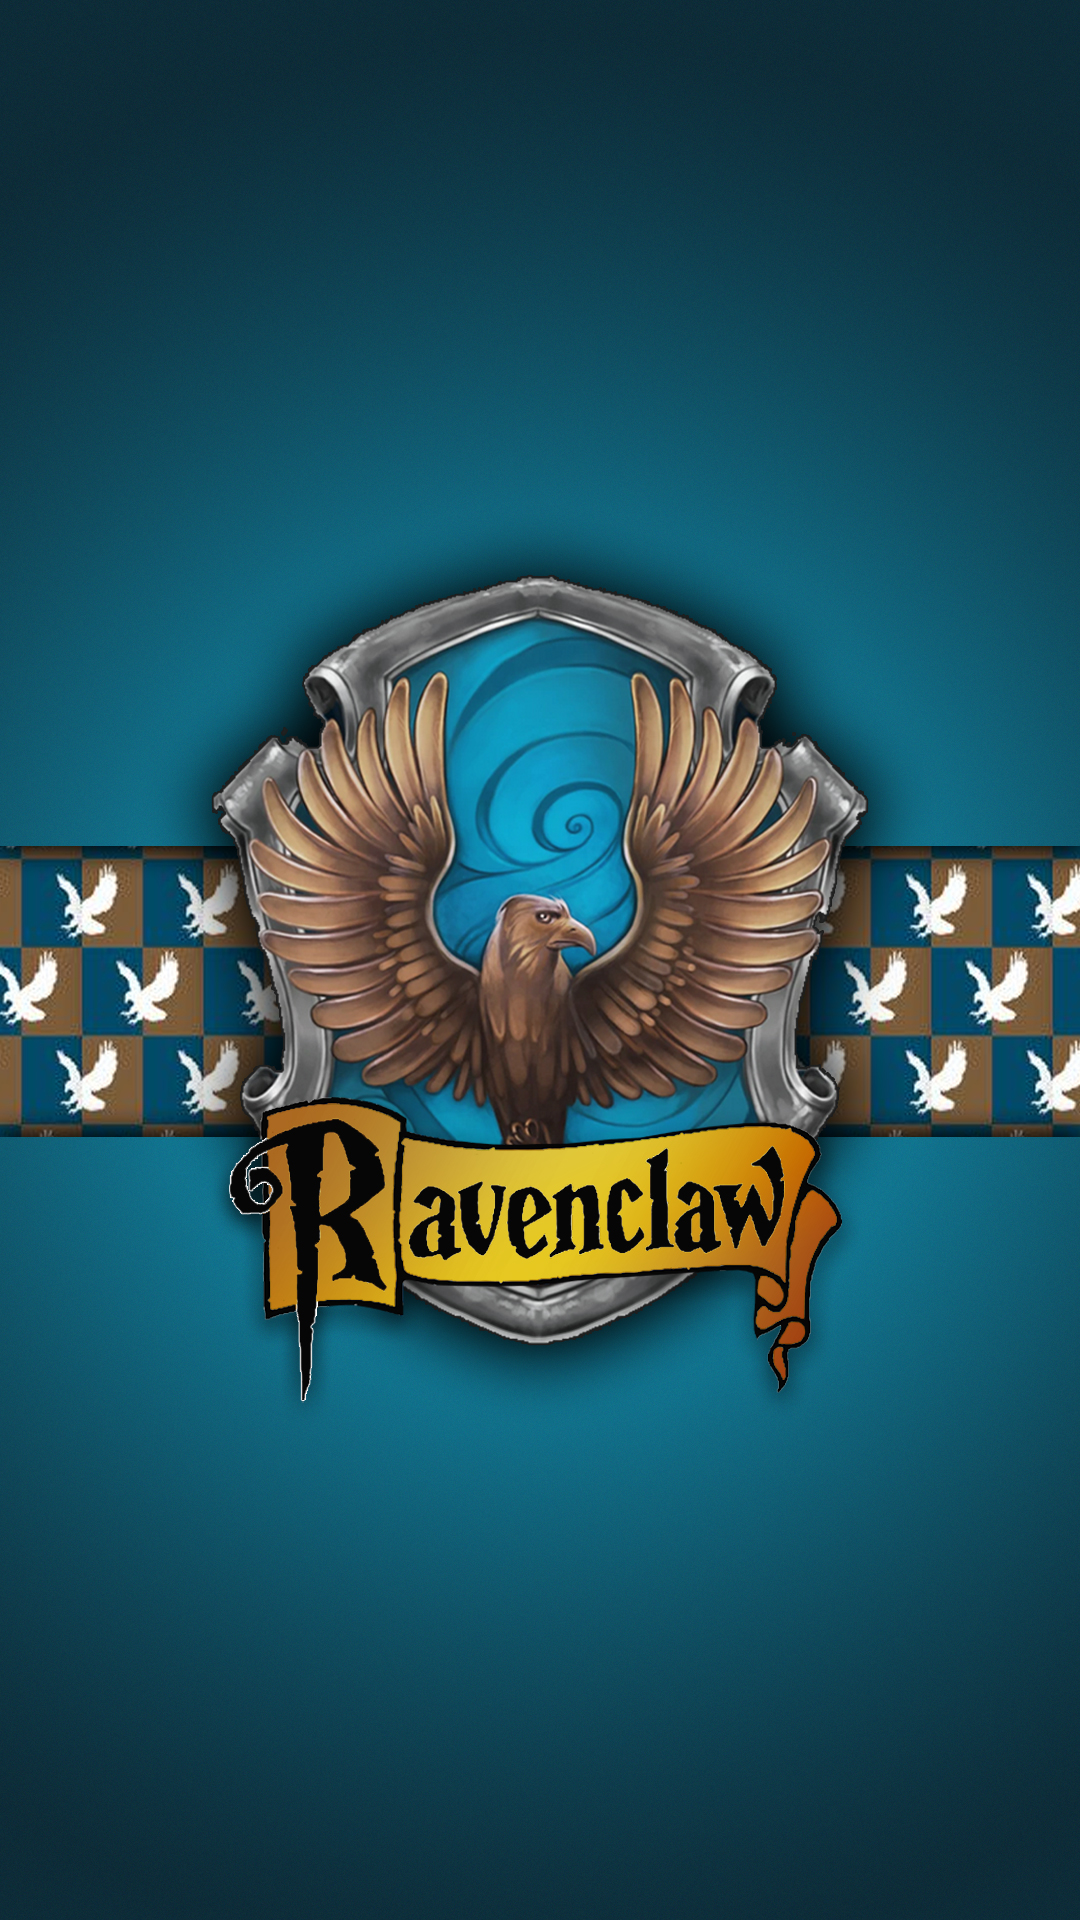 Harry Potter Ravenclaw House by Starfade